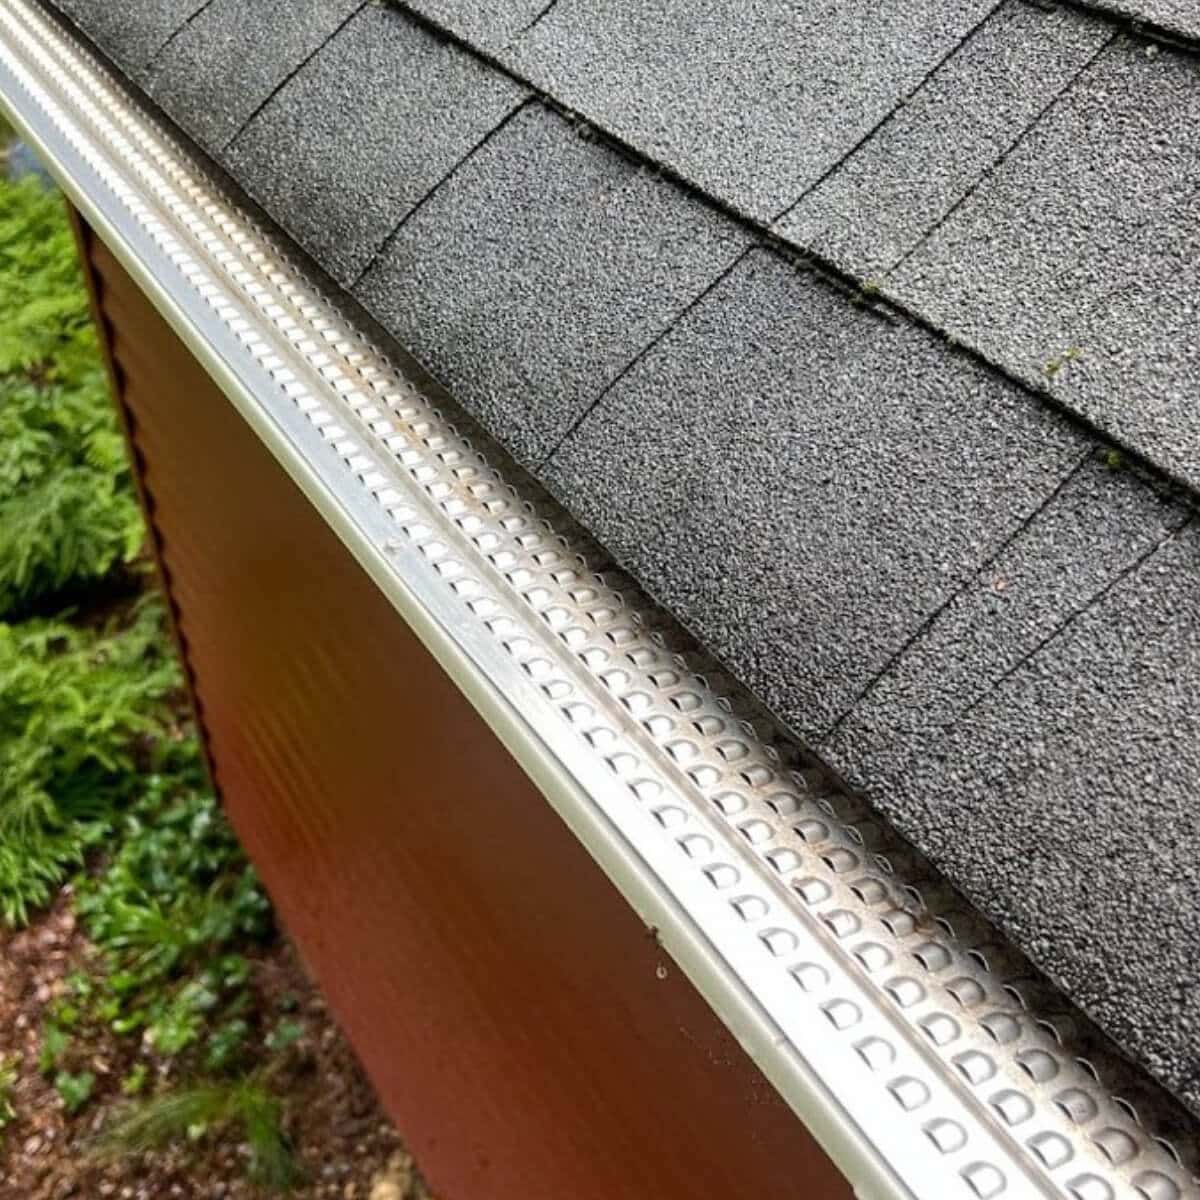 clean house gutter after pro gutter cleaning service in allentown pa